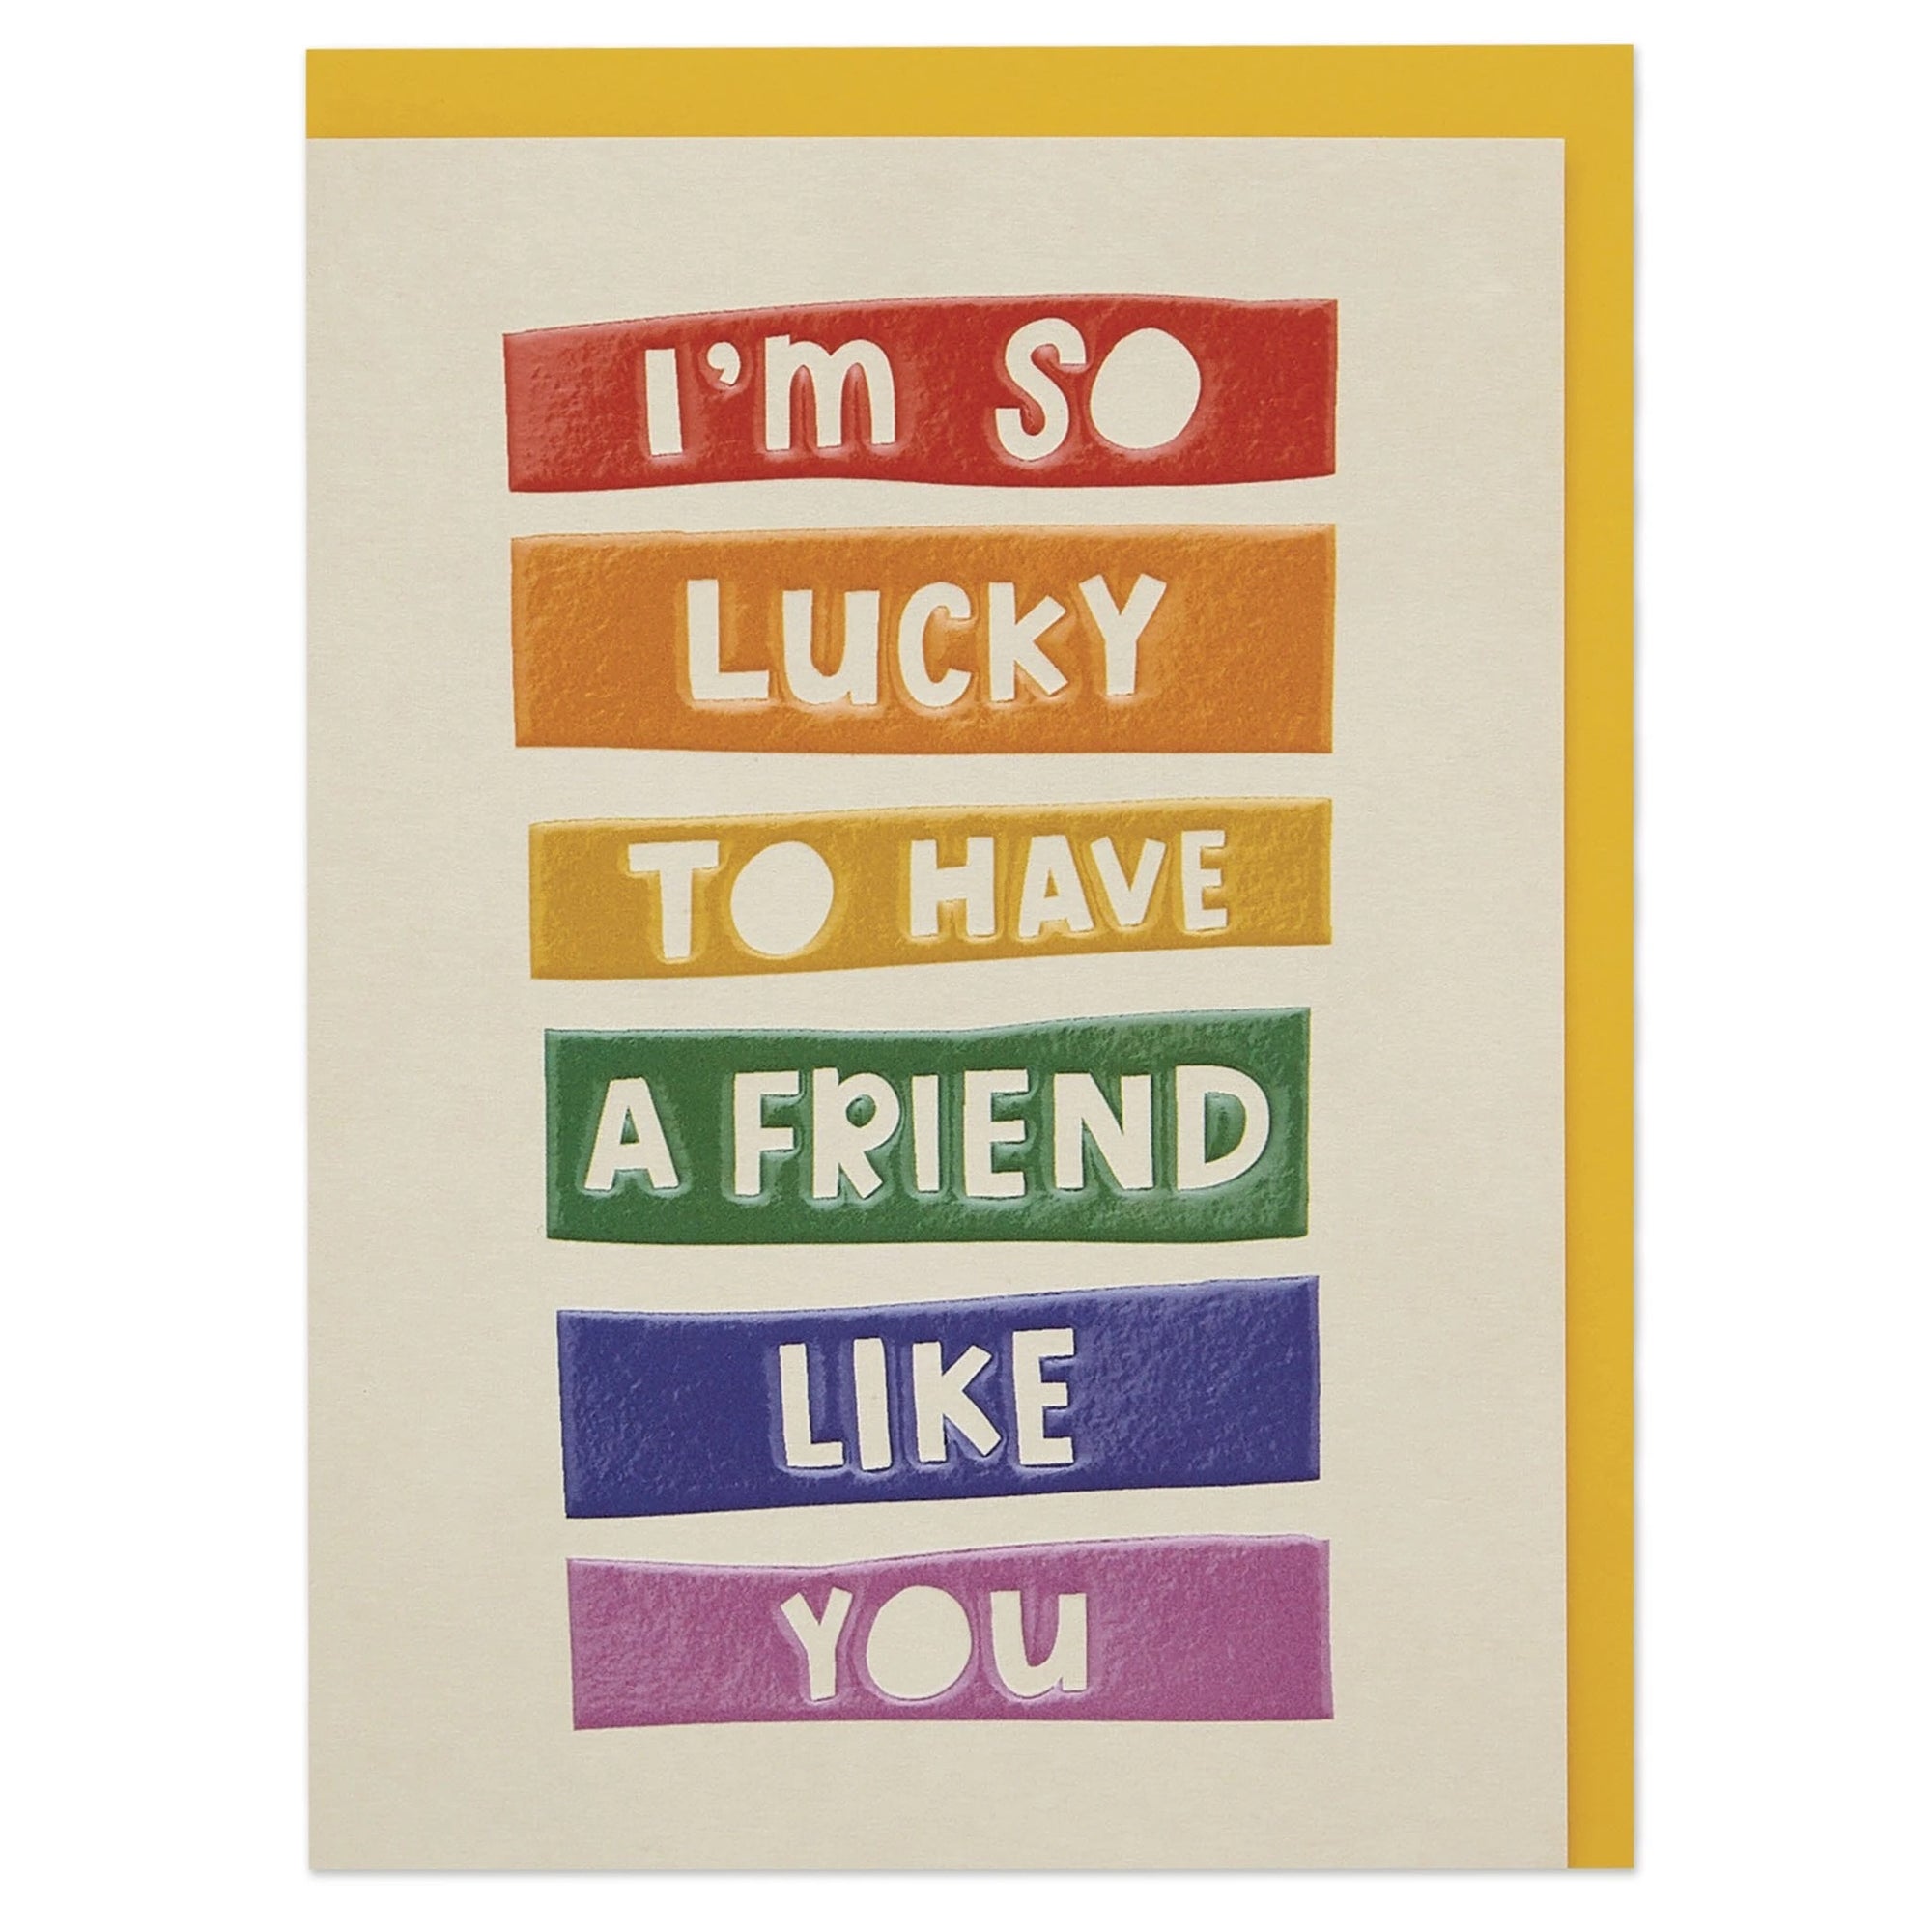 “I'm so lucky to have a friend like you” card